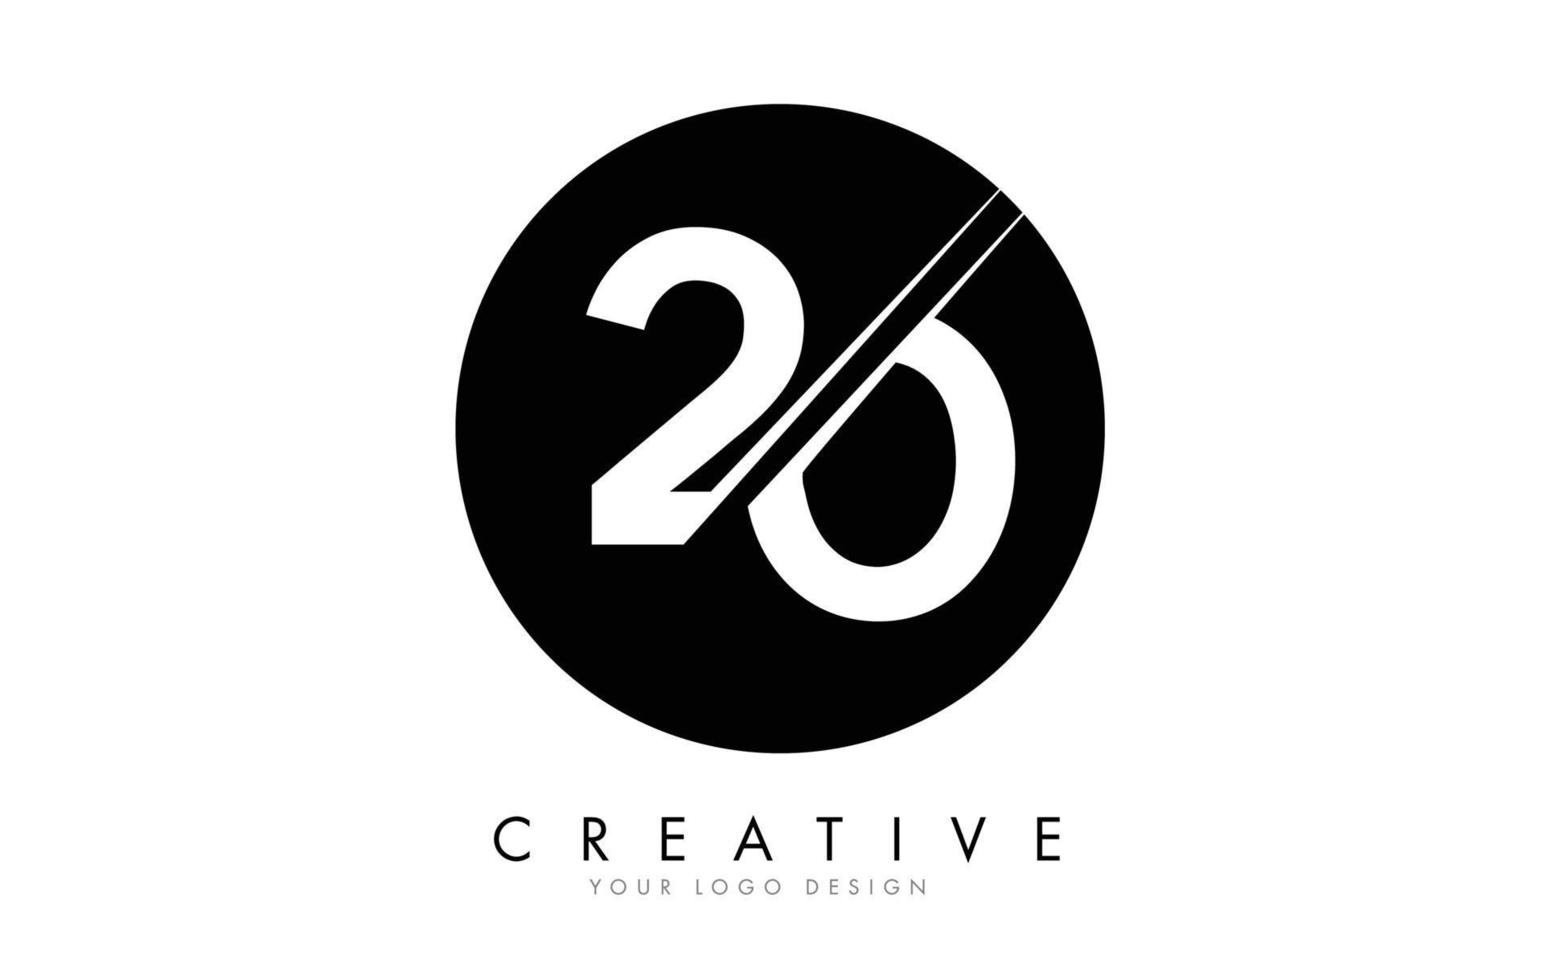 20 2 0 Number Logo Design with a Creative Cut and Black Circle Background. vector